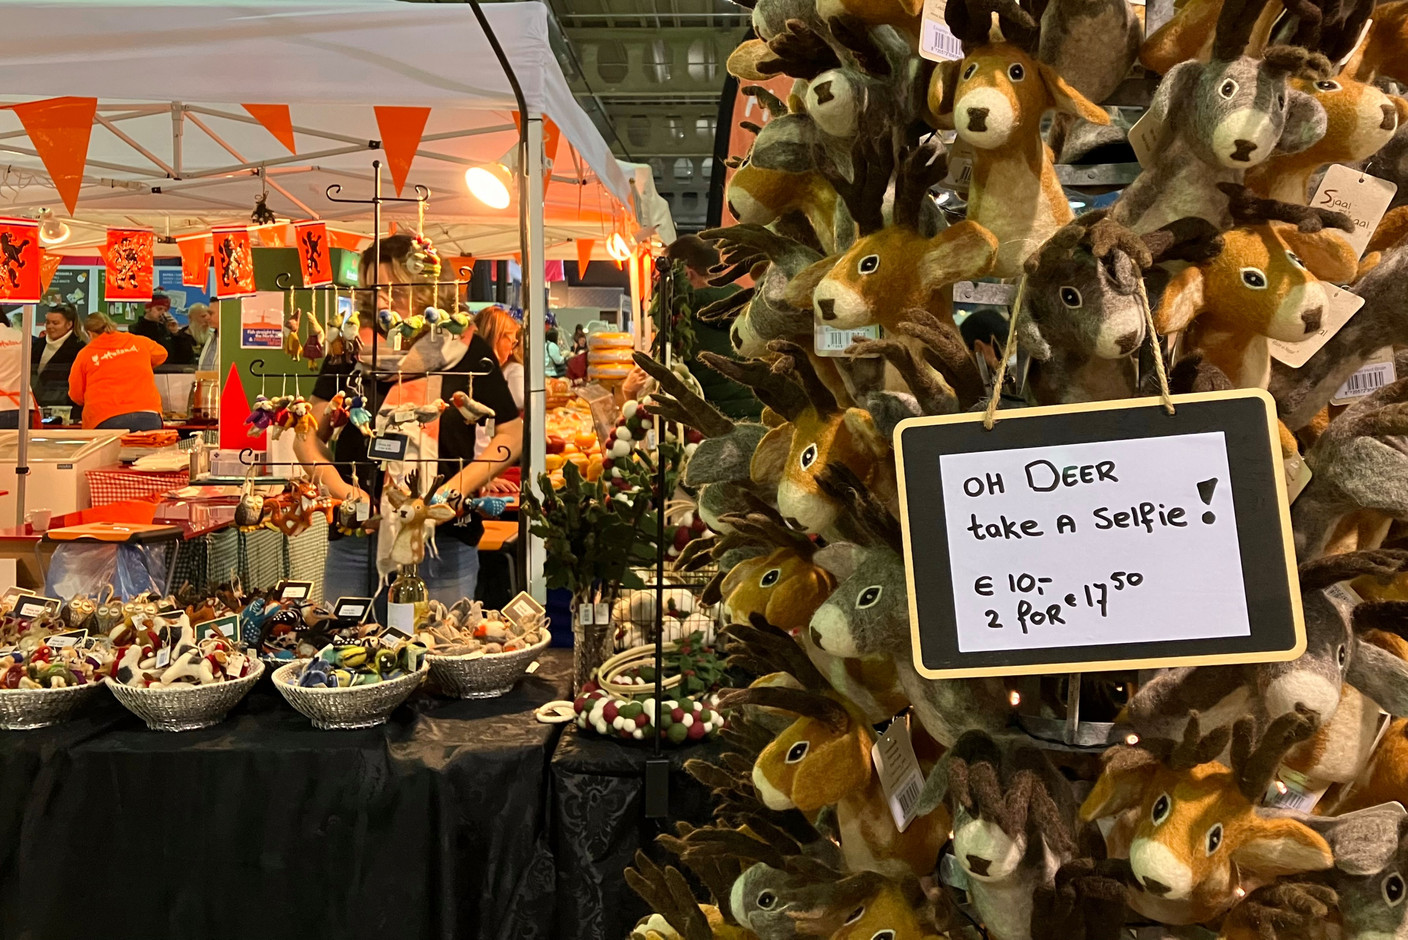 Deer puppets, other animal-themed decorations, cheese, liquorice and traditional stroopwafels were some of the items available for sale at the Dutch stand. Photo: Lydia Linna/Maison Moderne